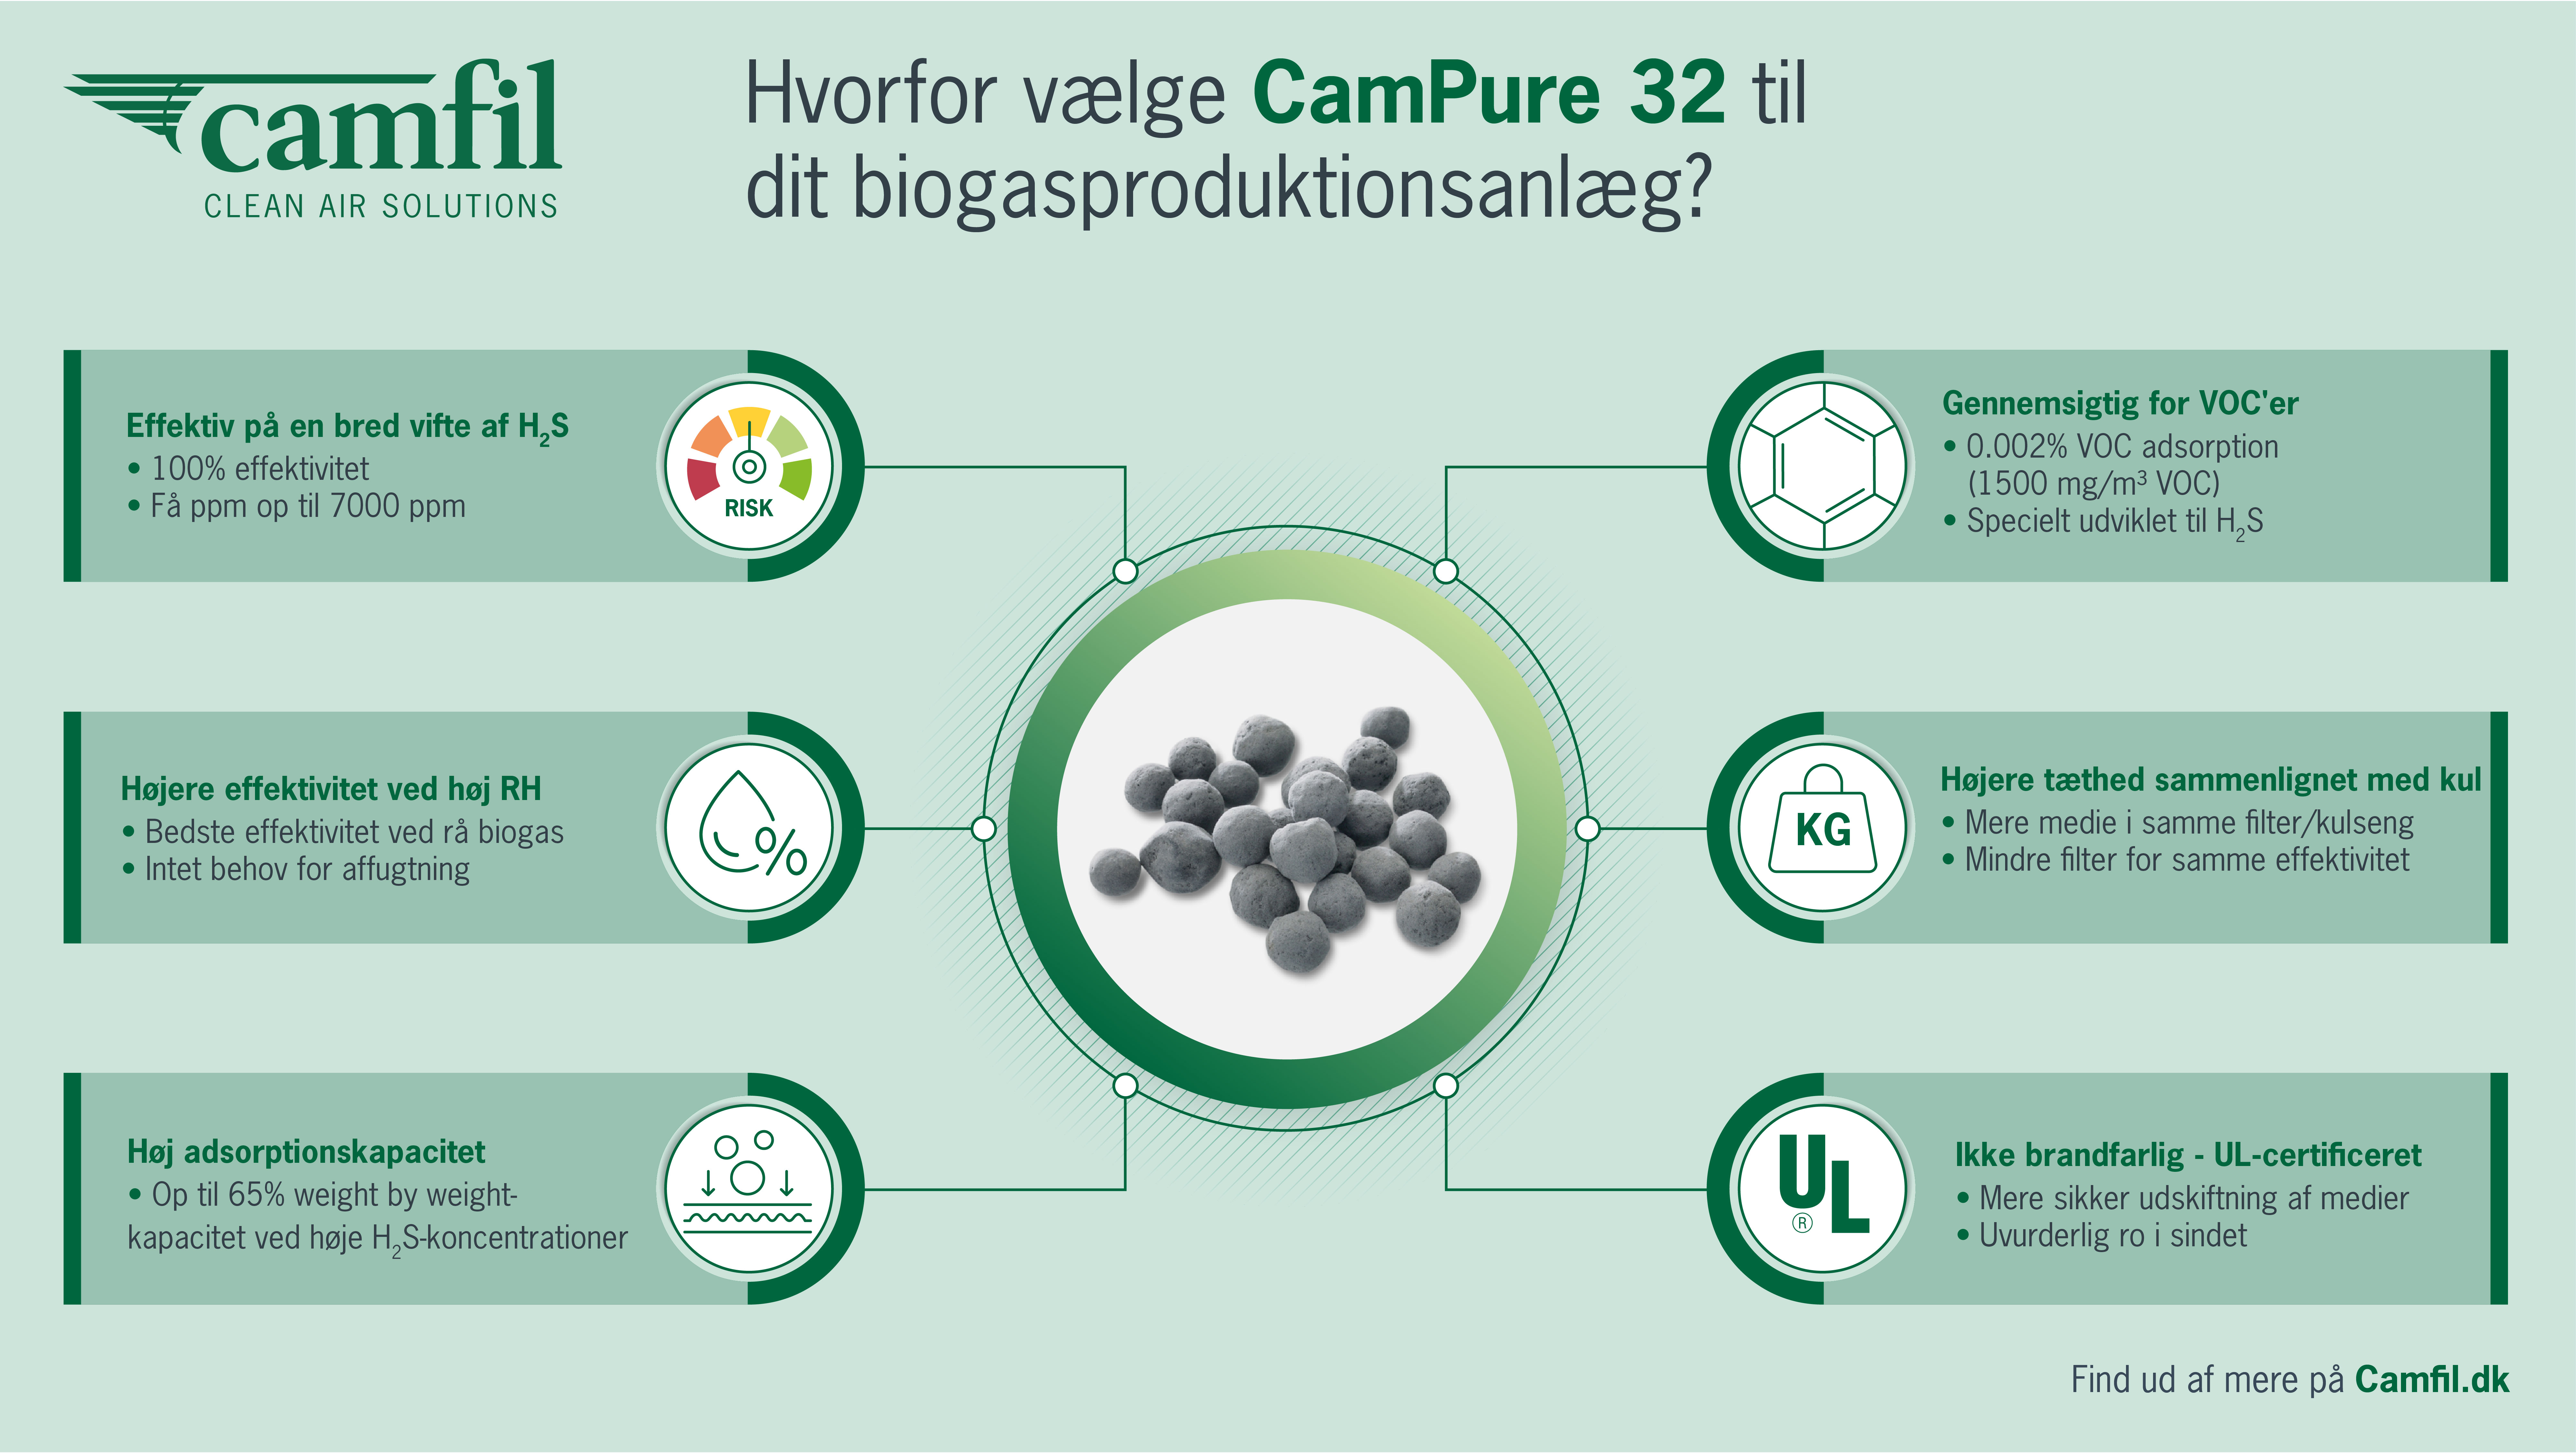 Overview of Campure 32 for biogas - Danish text